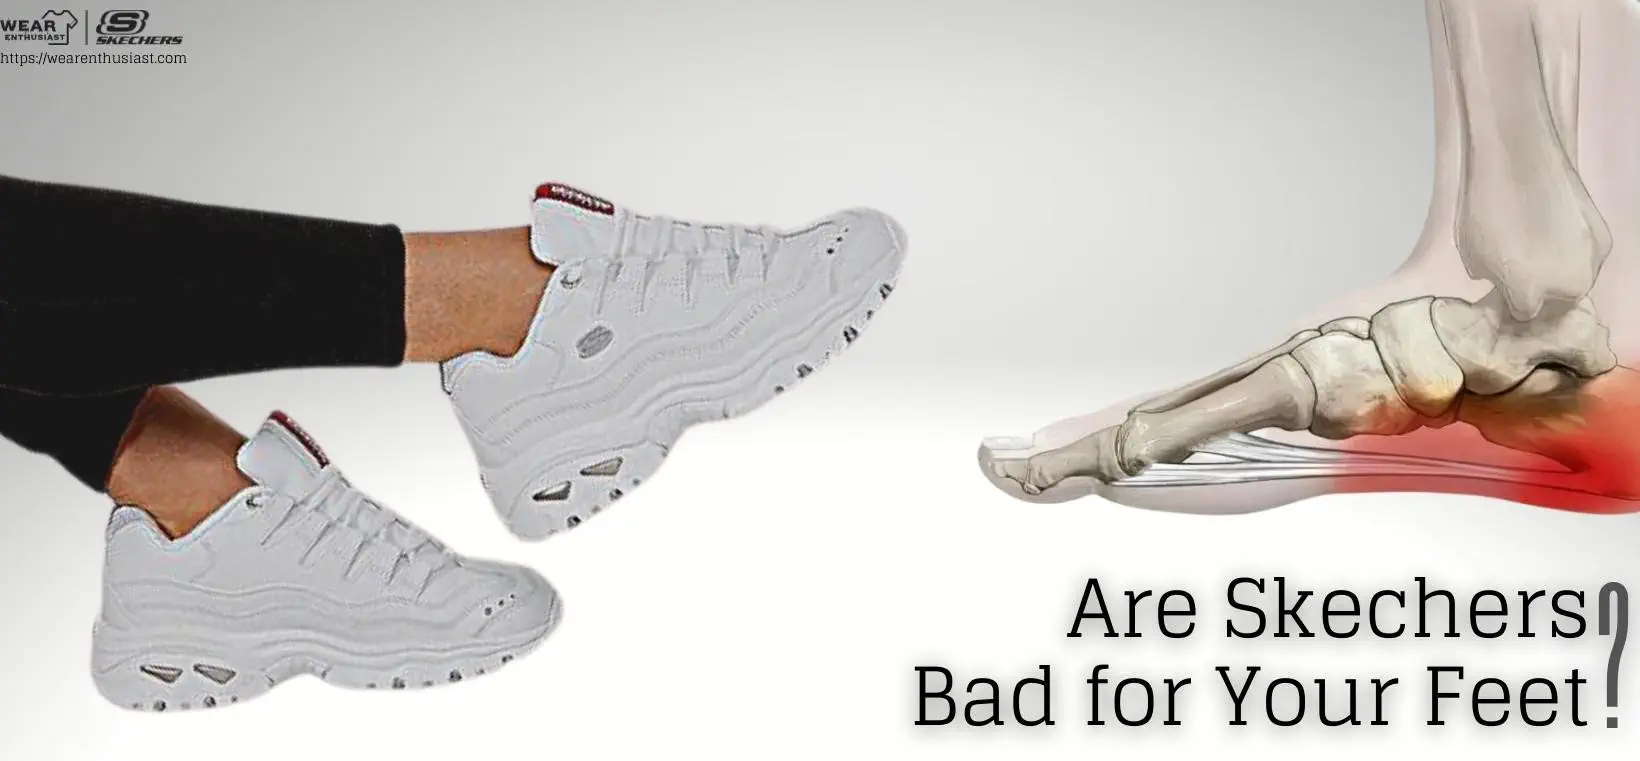 Are Skechers Bad for Your Feet?